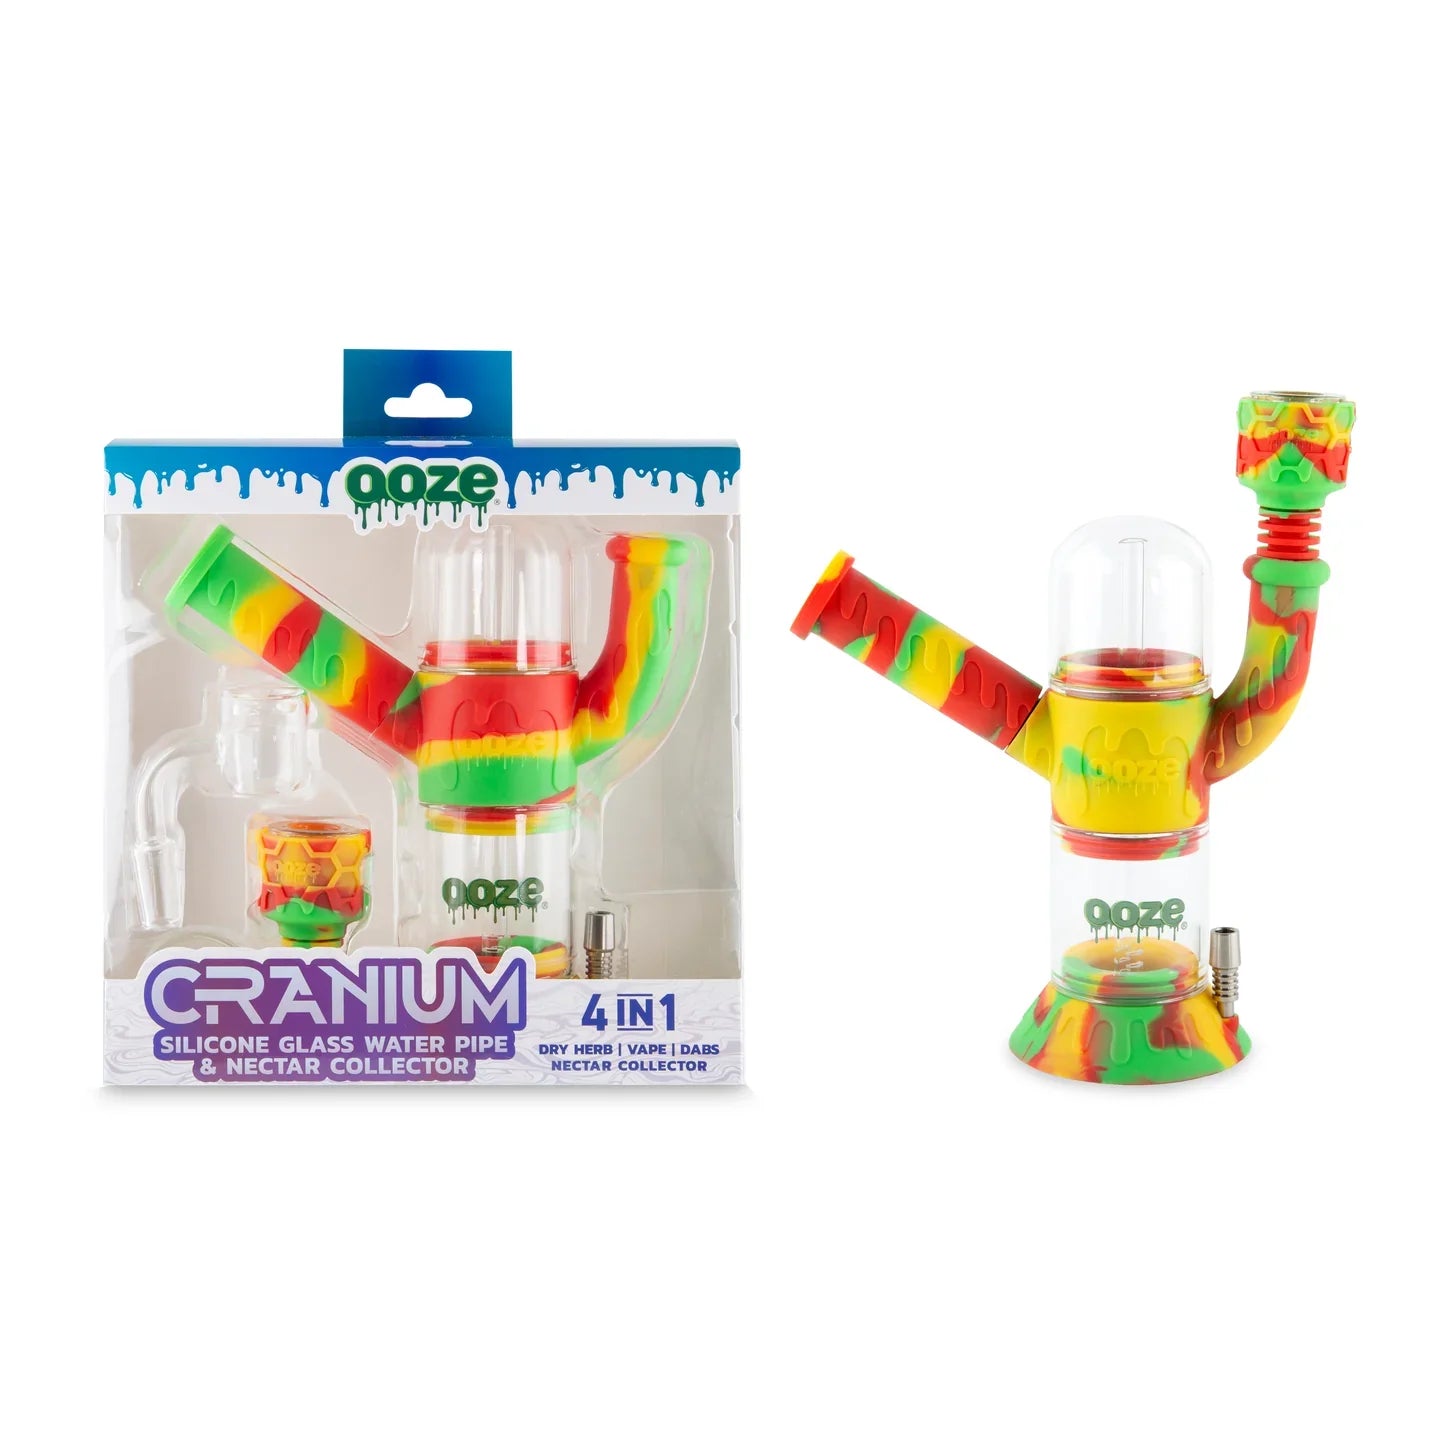 Ooze | Cranium Silicone Water Pipe, Dab Rig & Dab Straw_5